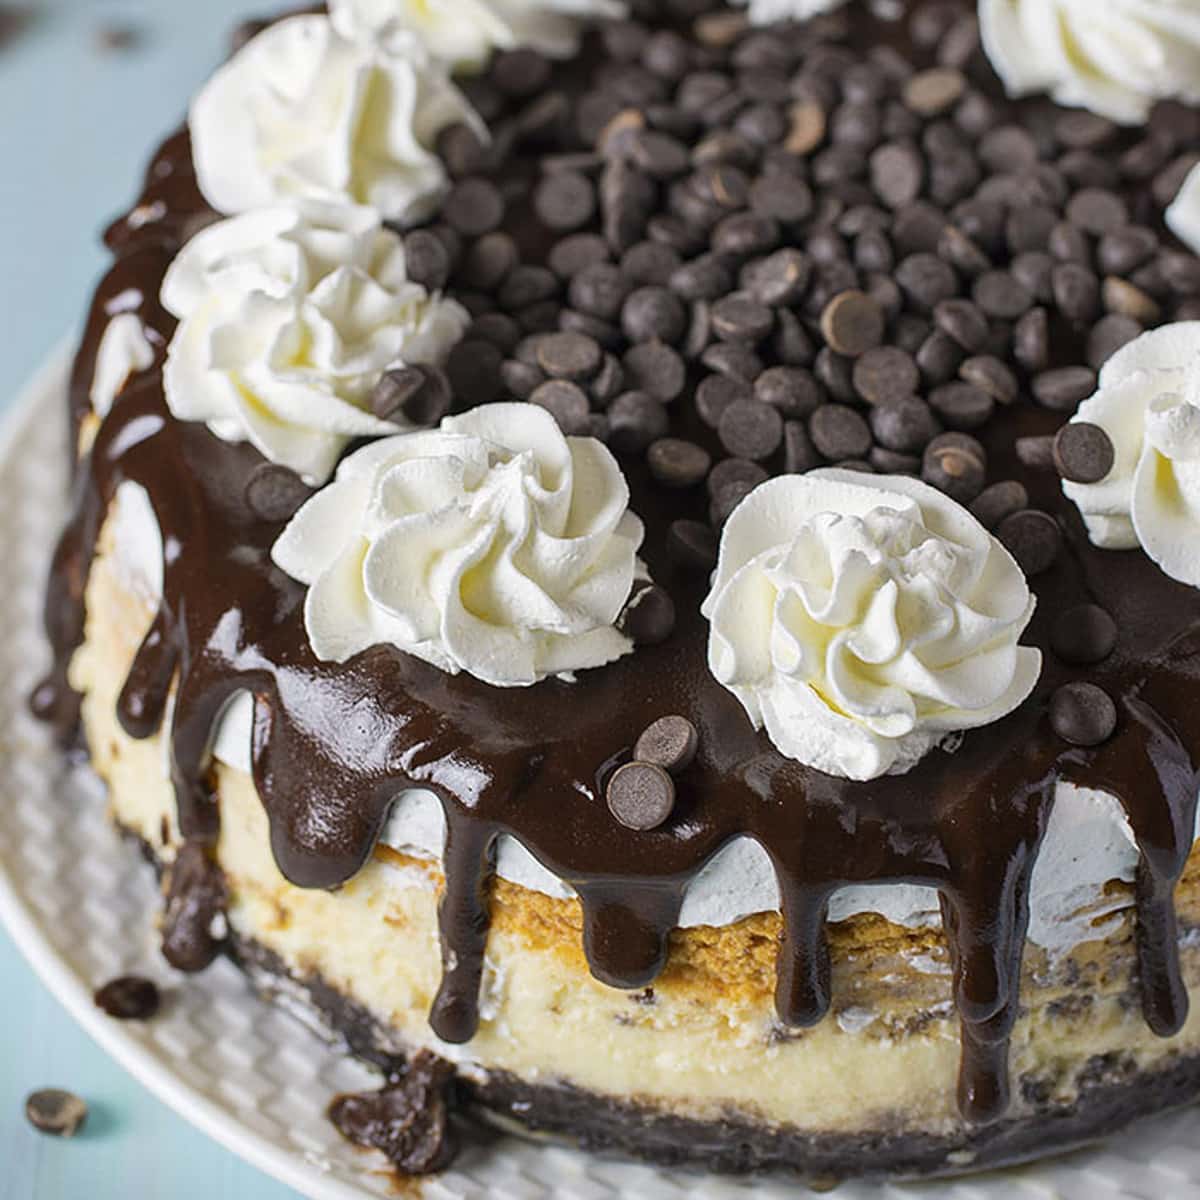 Thanksgiving dinner ideas - double layer pumpkin cheesecake covered with chocolate sauce and whipped cream.